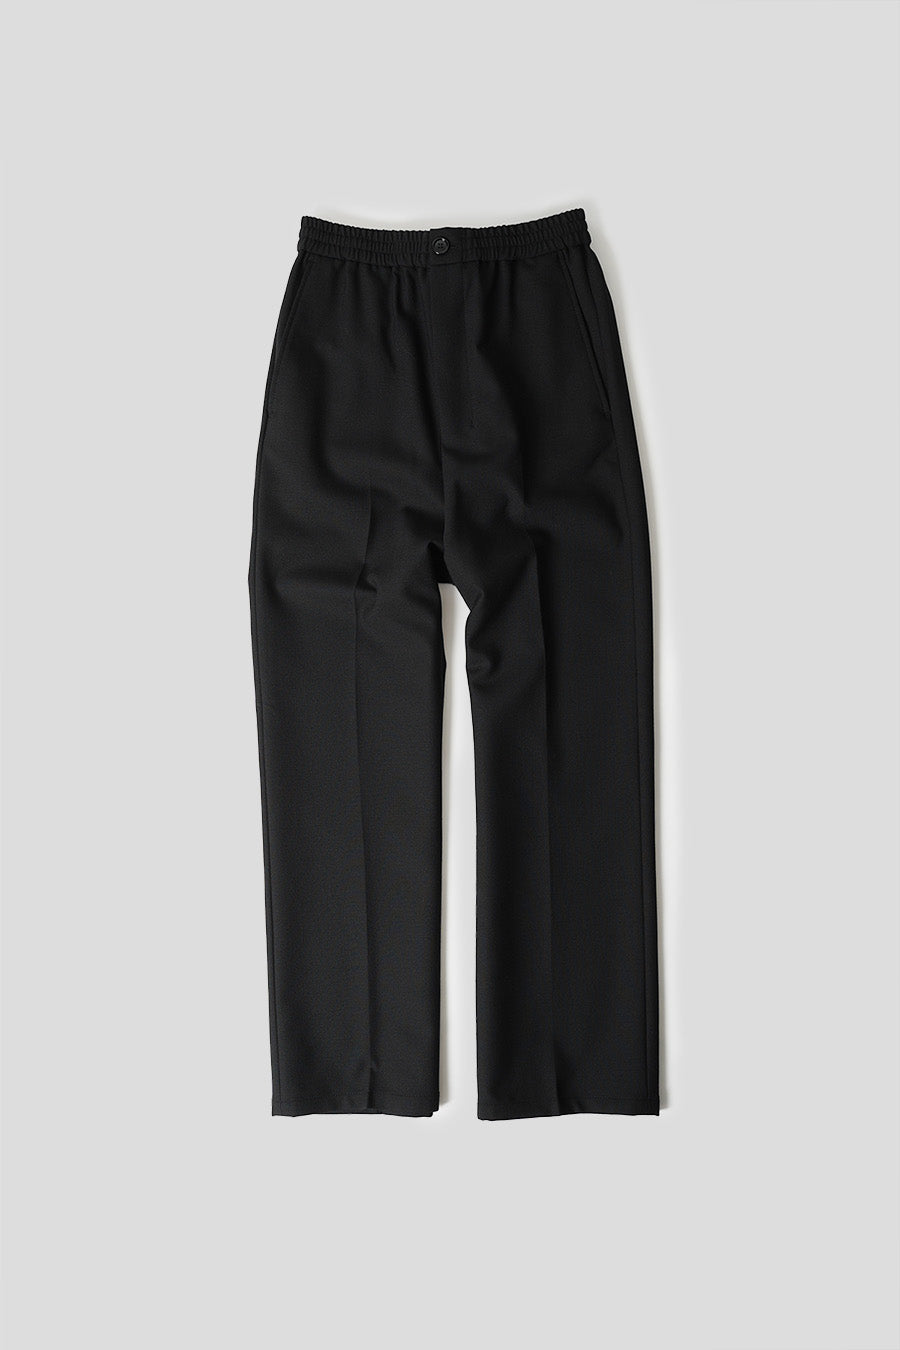 The North Face - YELLOW AND BLACK DENALI PANTS – LE LABO STORE